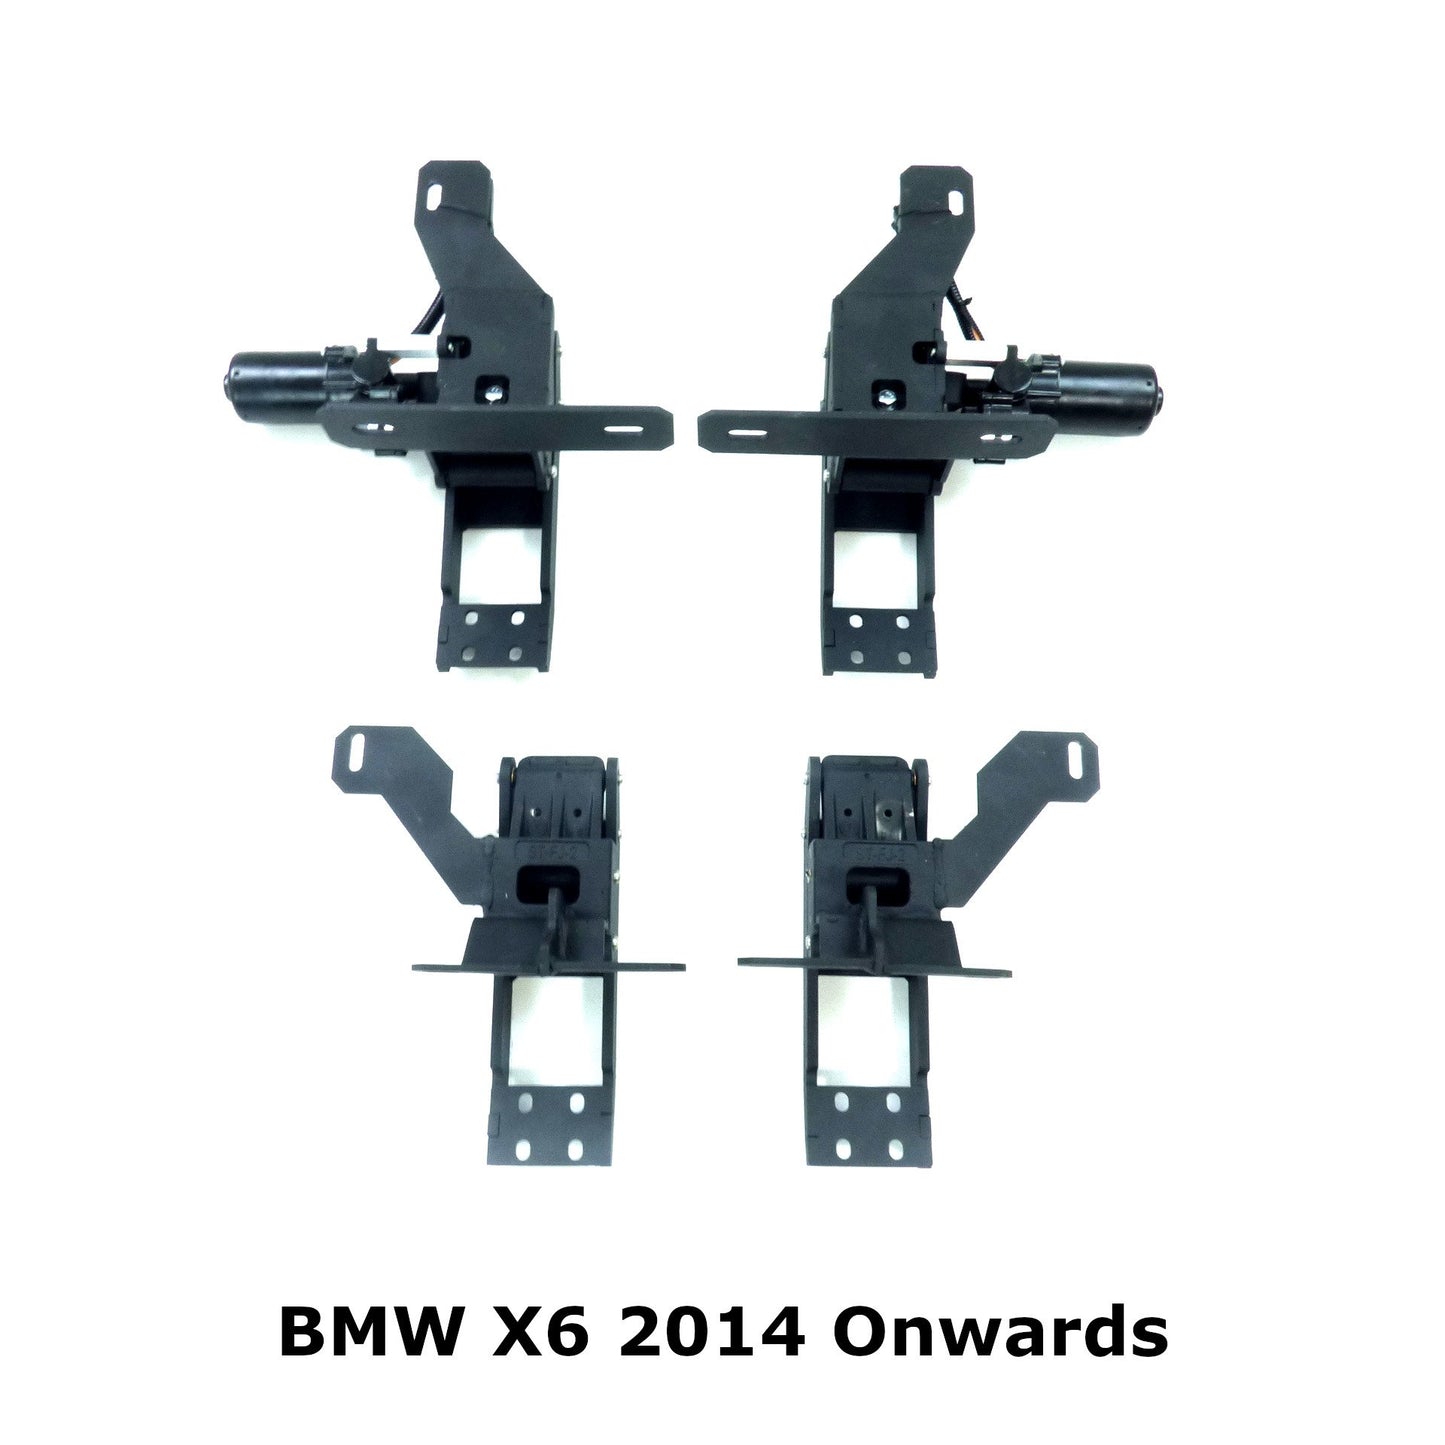 Electric Deployable Side Steps for the BMW X6 F16 2014-2017 (+ M Sport) -  - sold by Direct4x4